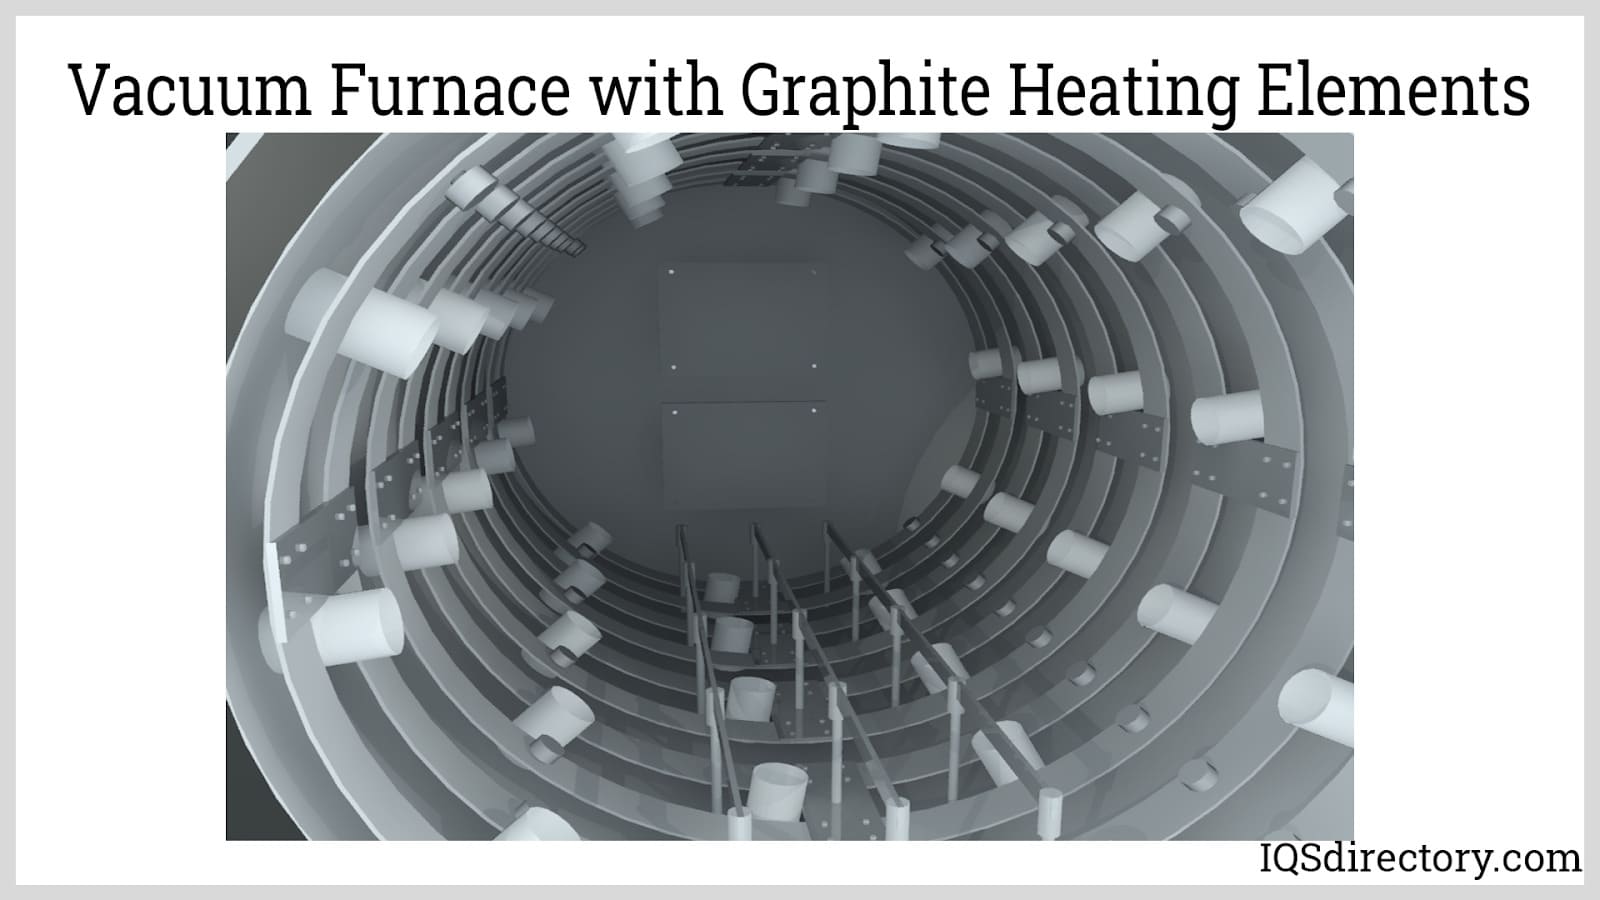 Vacuum Furnace with Graphite Heating Elements